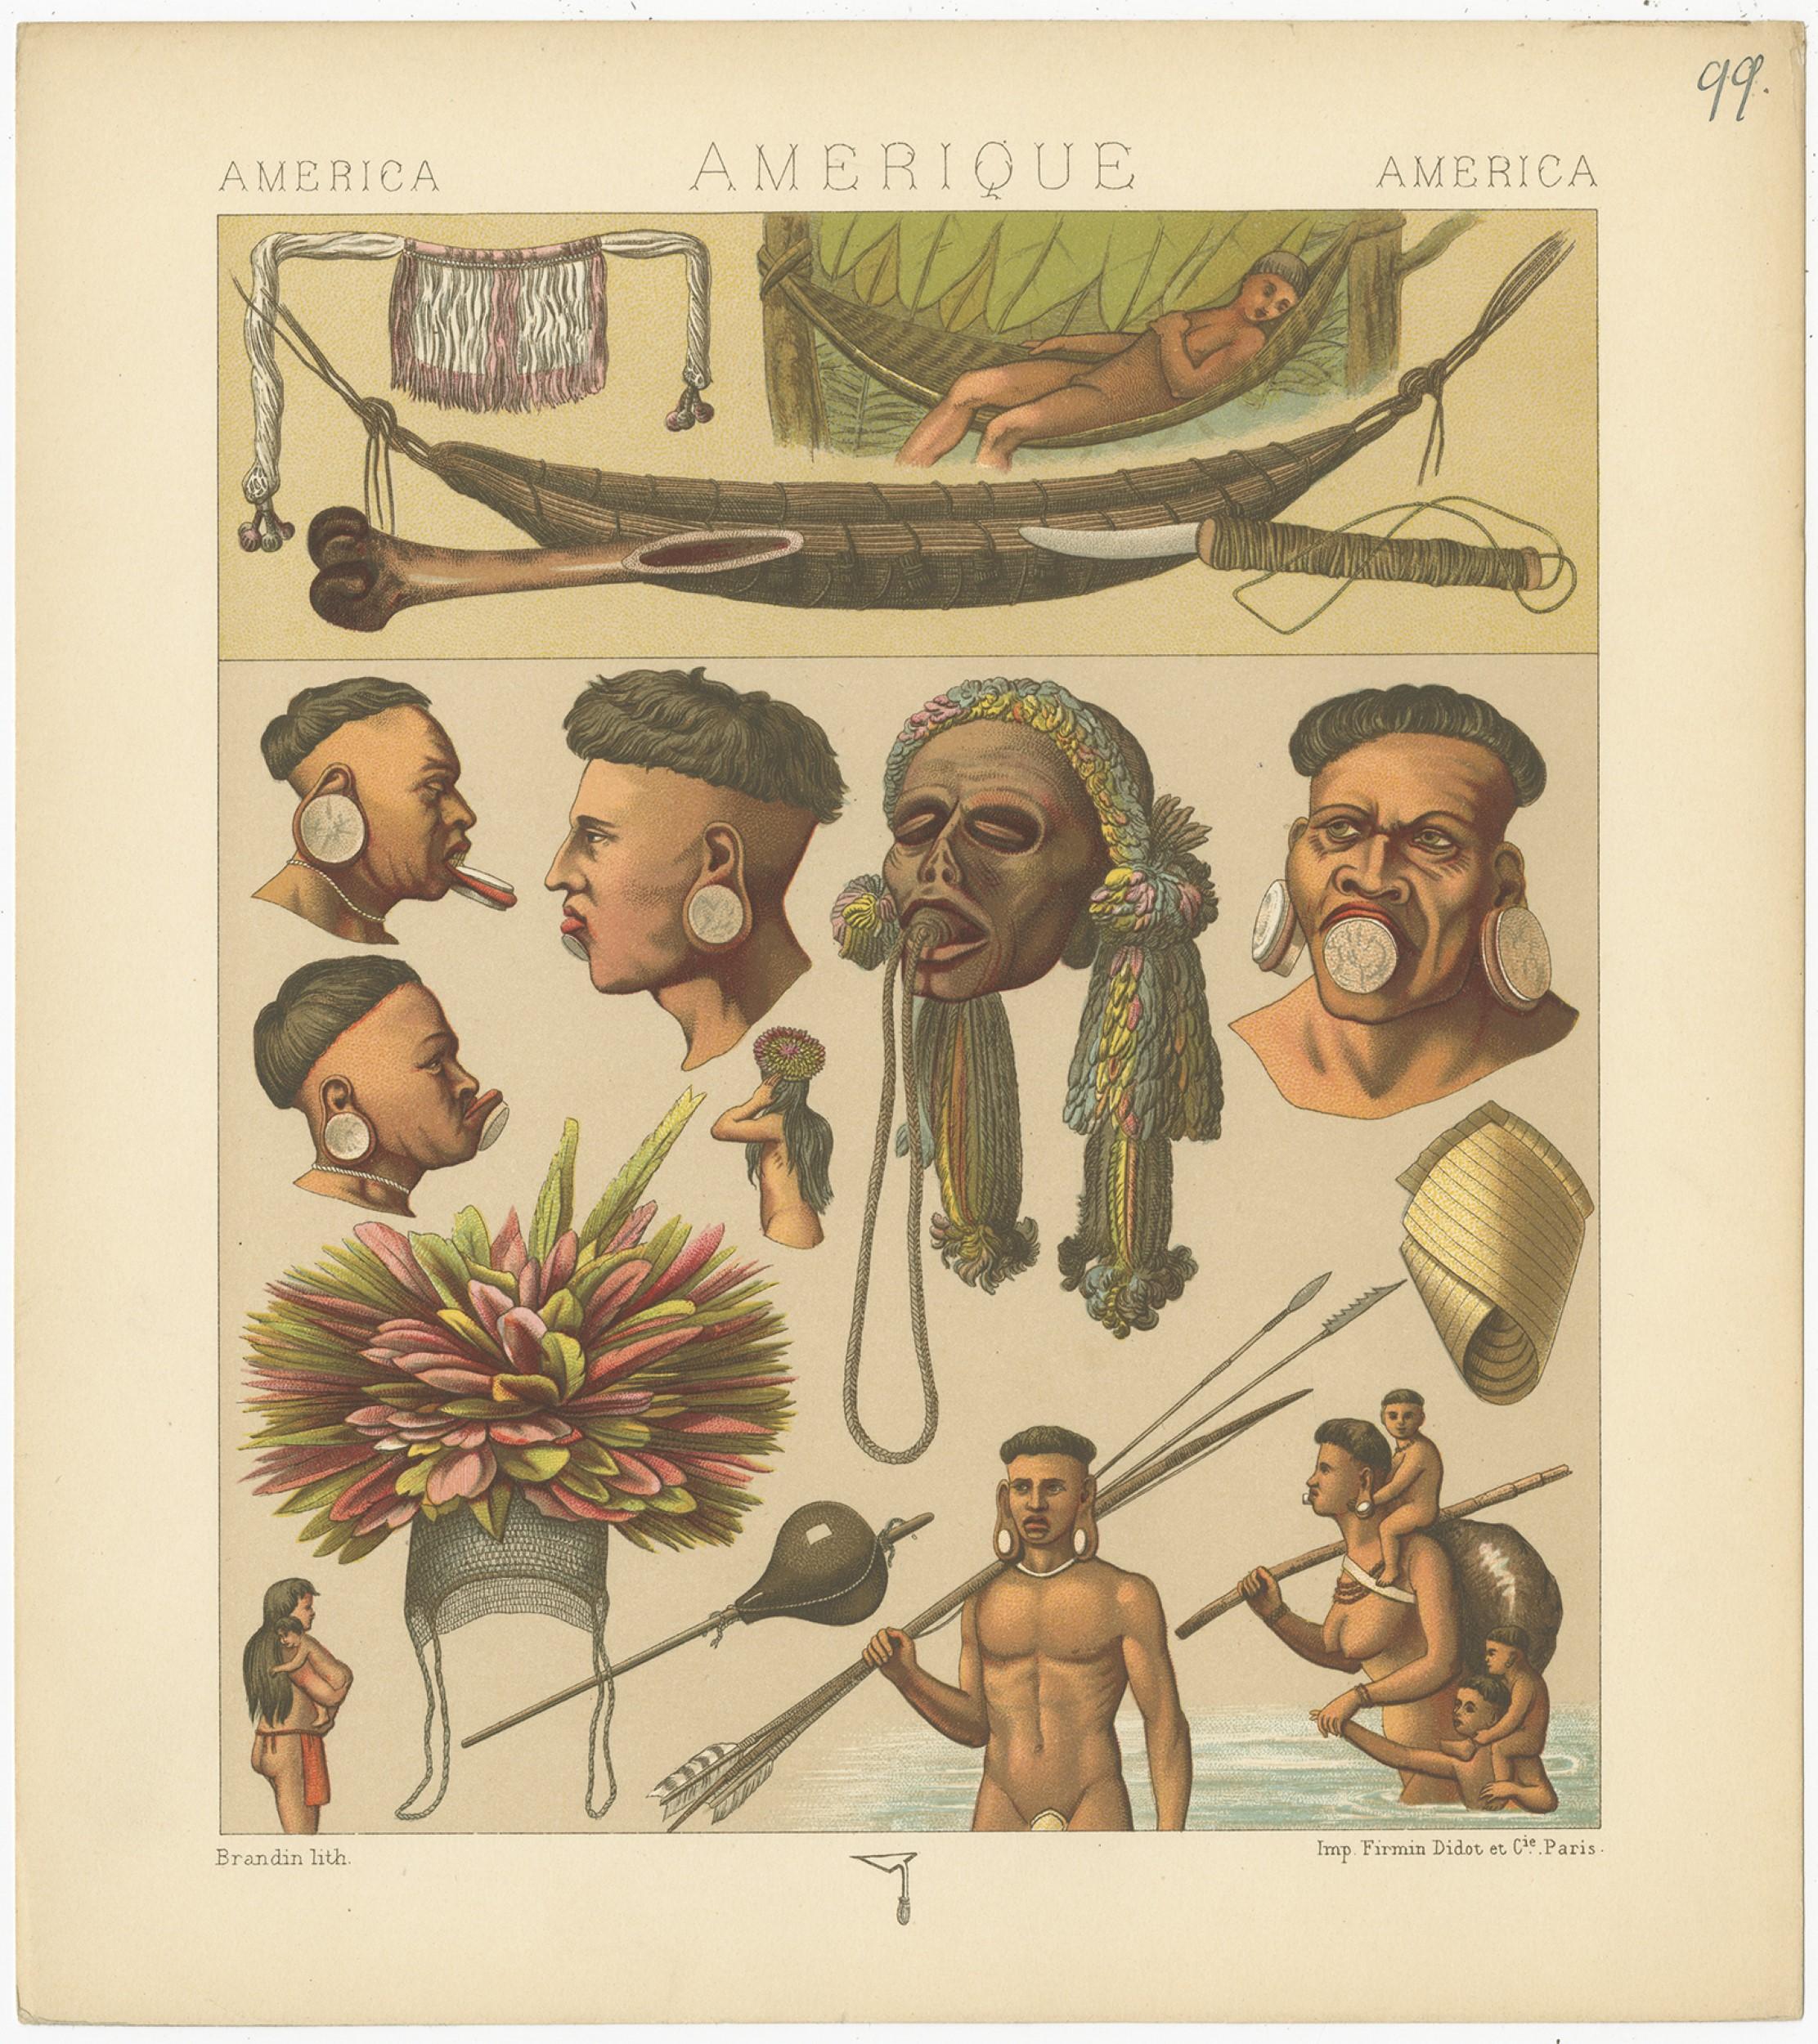 Antique print titled 'America - Amerique - America'. Chromolithograph of American Outfits (objects). This print originates from 'Le Costume Historique' by M.A. Racinet. Published, circa 1880.